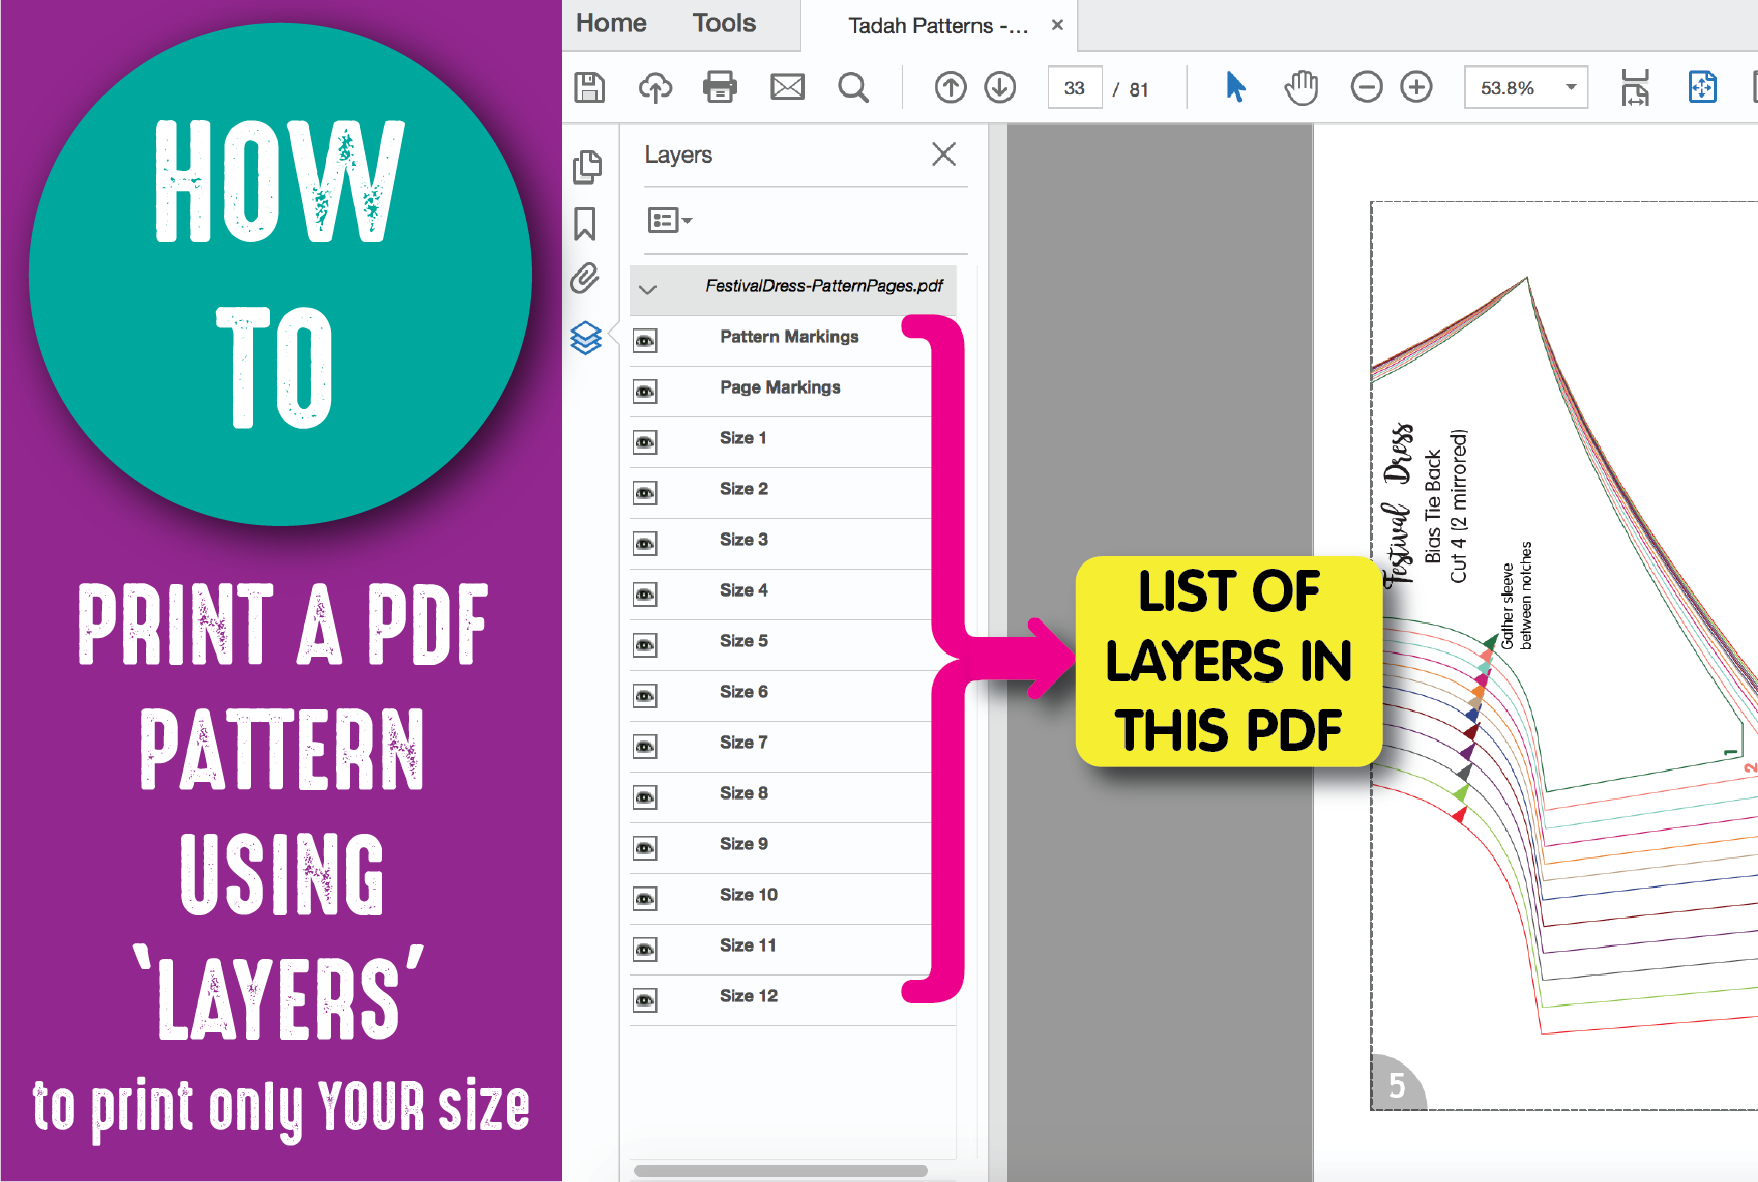 HOW TO: Print a PDF Pattern Using Layers - Tadah Patterns + Sewing